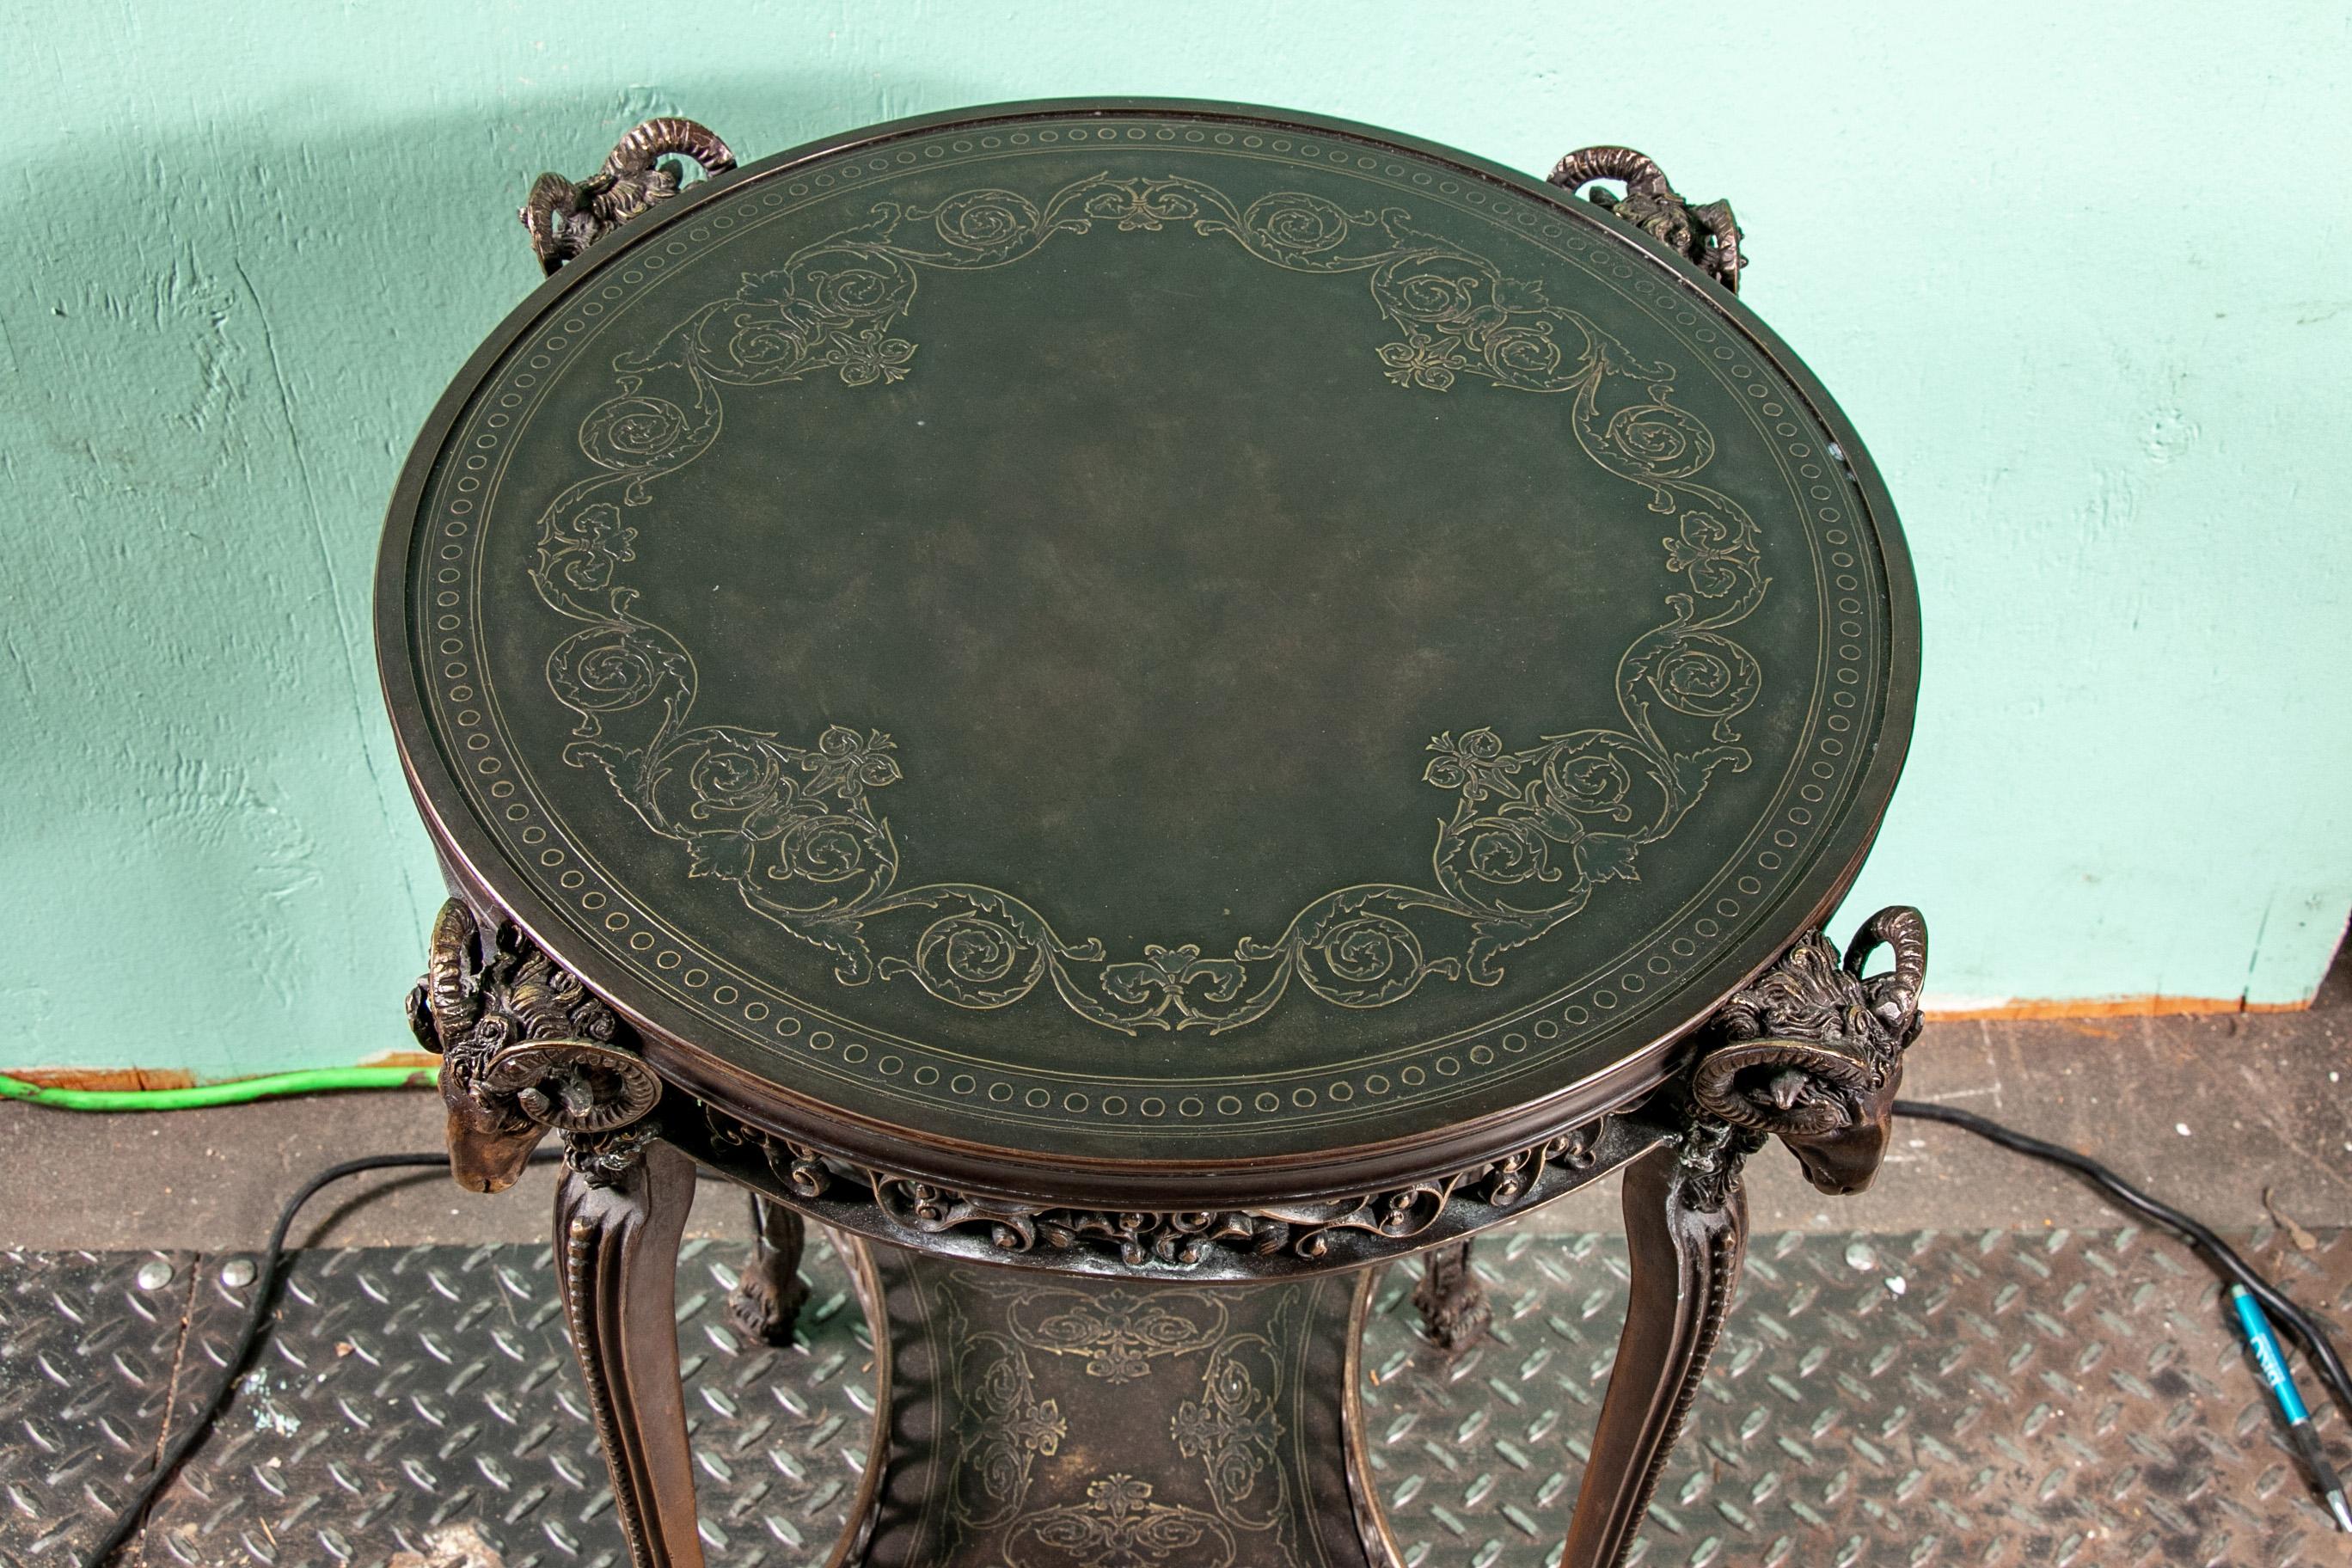 A circular top with scrolled decoration and openwork scrolled frieze.
A shaped lower shelf with leafy decoration and a gallery. 
Raised on tall curved legs with ram's heads at top and hoof feet. 

Condition: well presented in good condition.